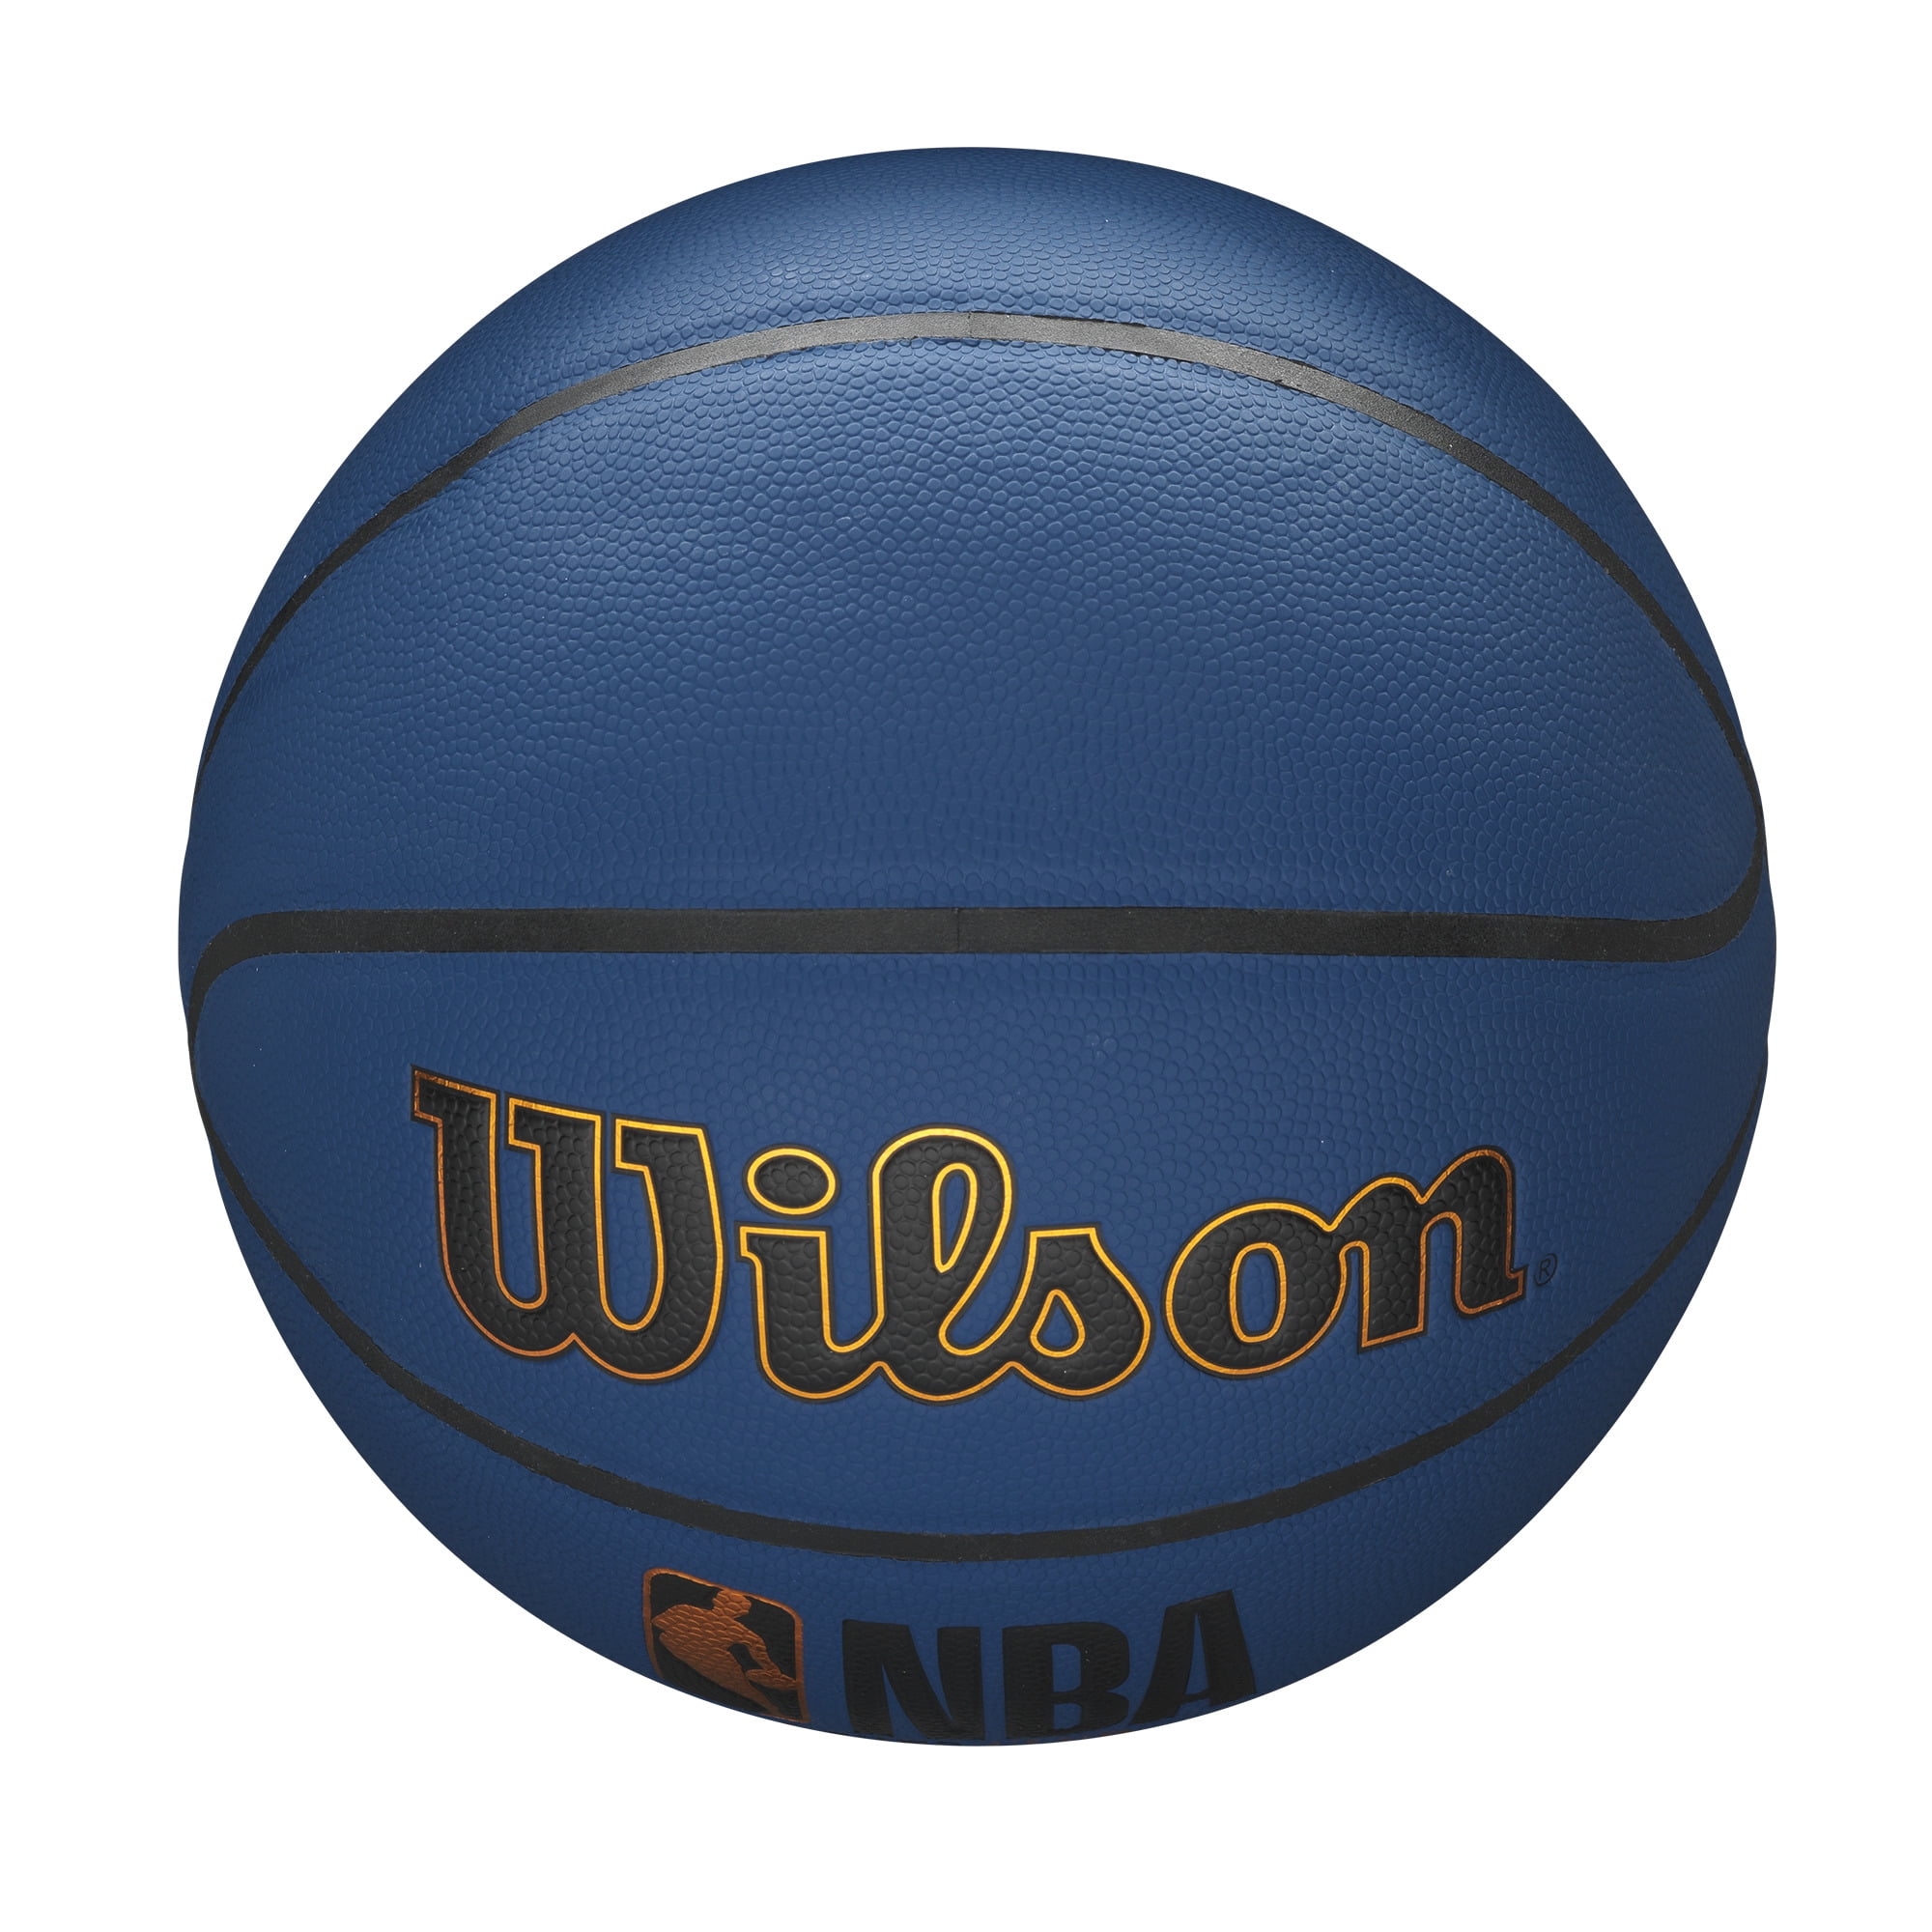 PaulStore Deflated Outdoor Basketball Sports Indoor Outdoor Size 7 Game Junior Adults 